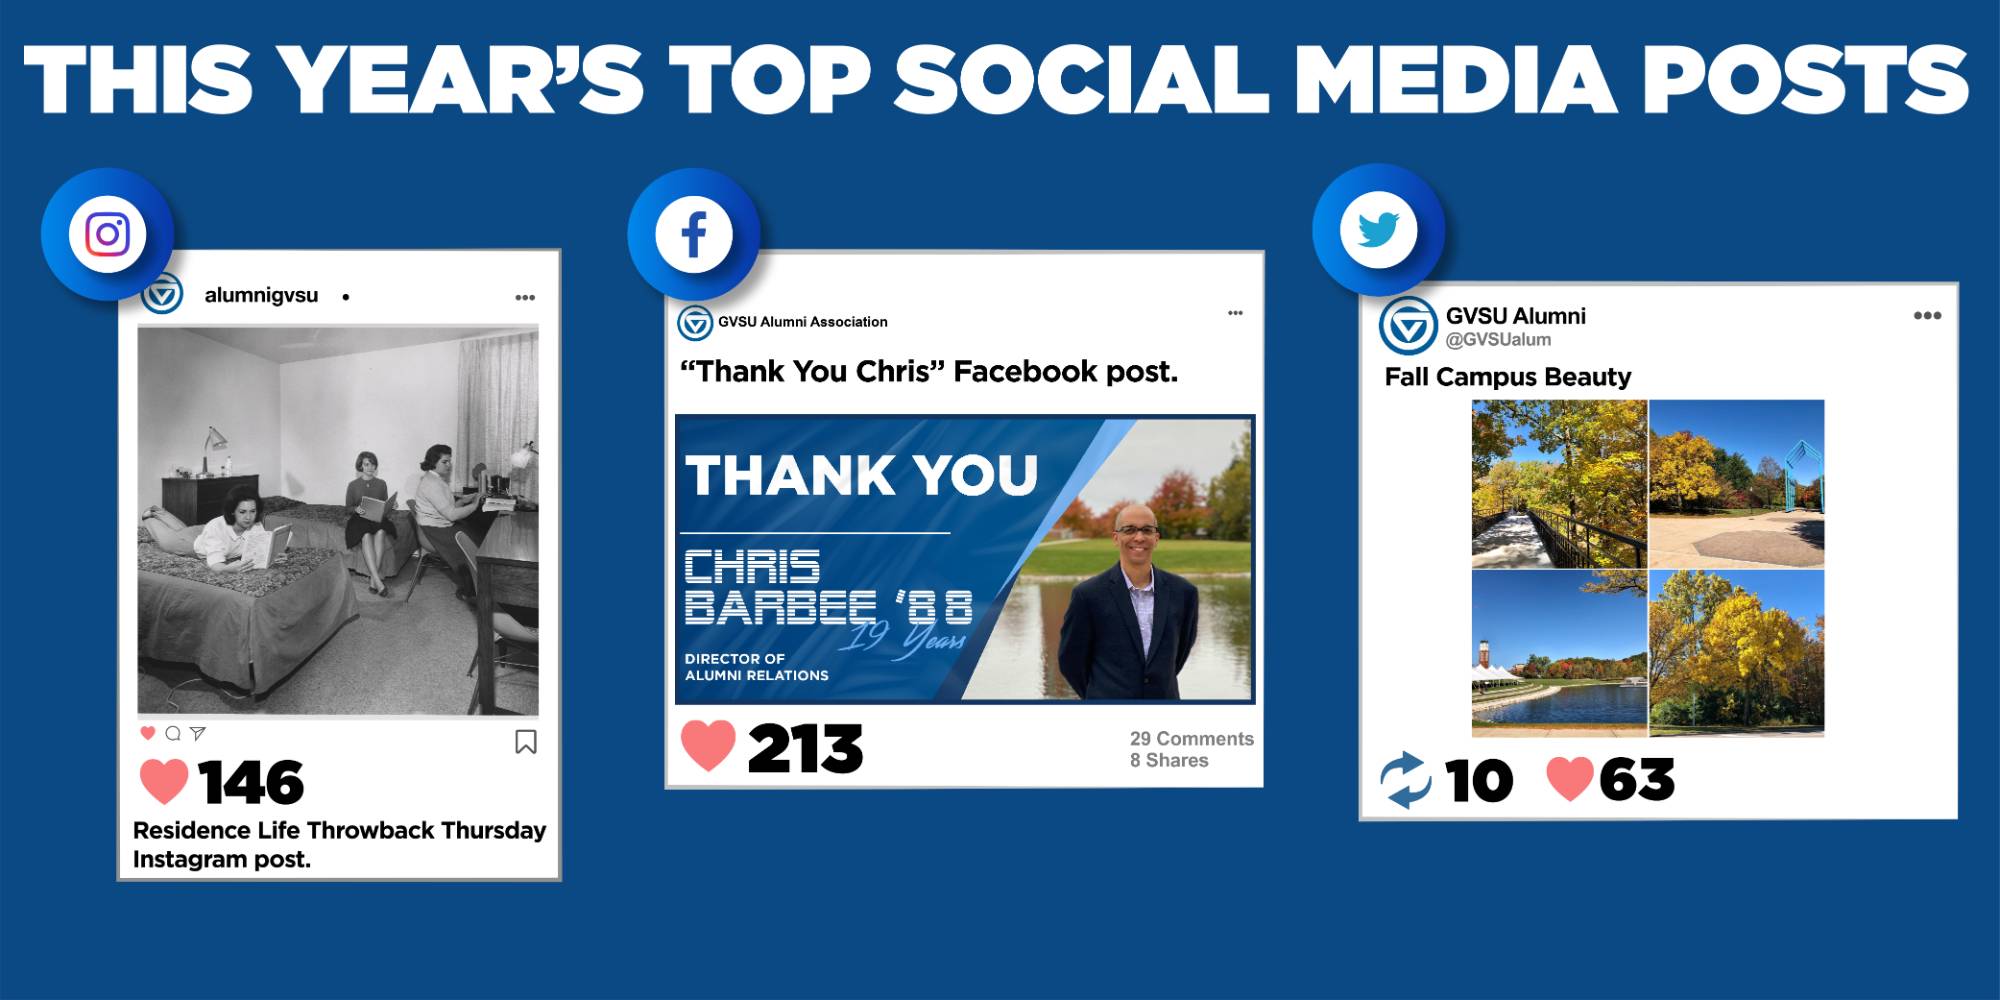 This year's top social media posts include; Instagram: photo reel of Residence Life Throwback Thursday posts, which received 146 Likes. Facebook: "Thank You Chris" post, which received 213 likes. Twitter: Fall Campus Beauty post, which received 10 retweets and 63 likes.